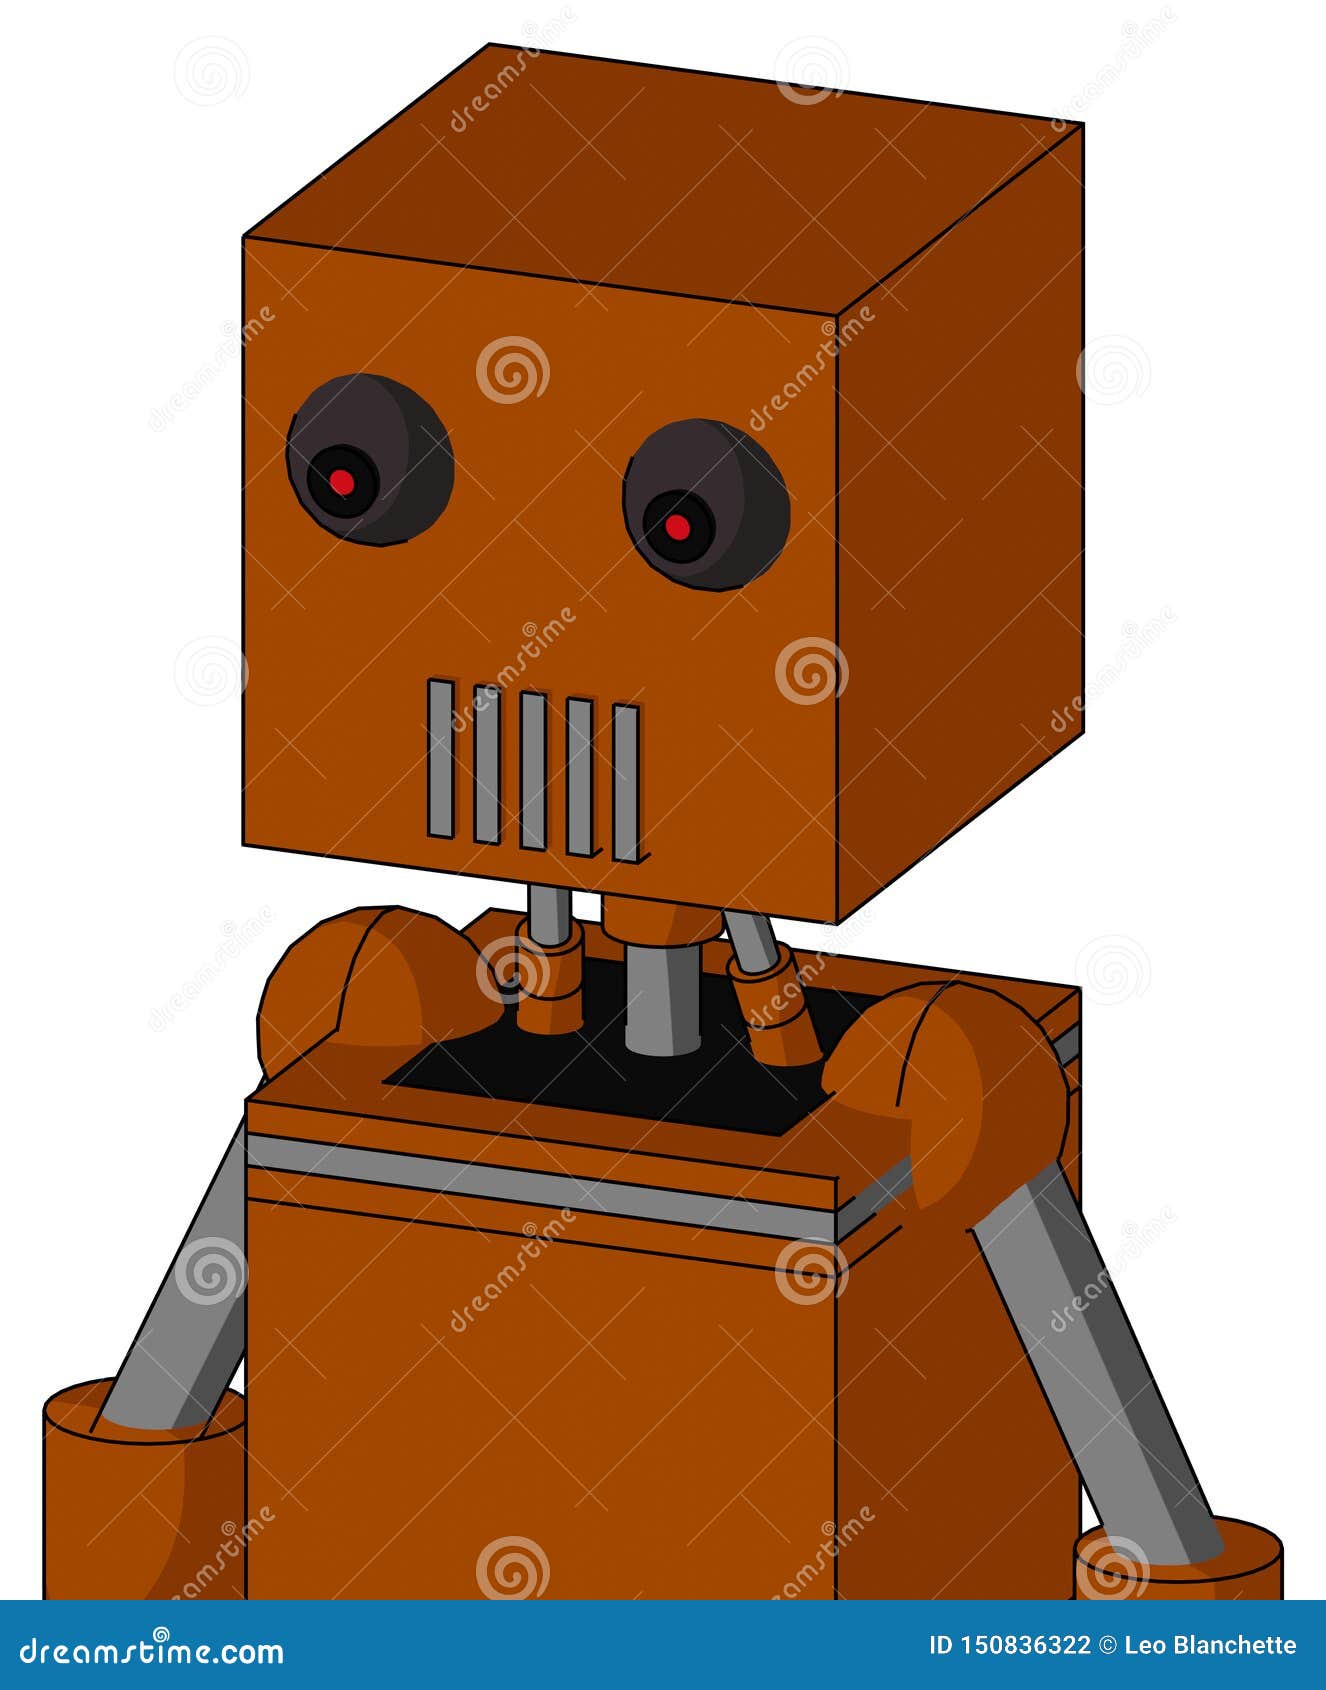 redish-orange mech with box head and vent mouth and red eyed